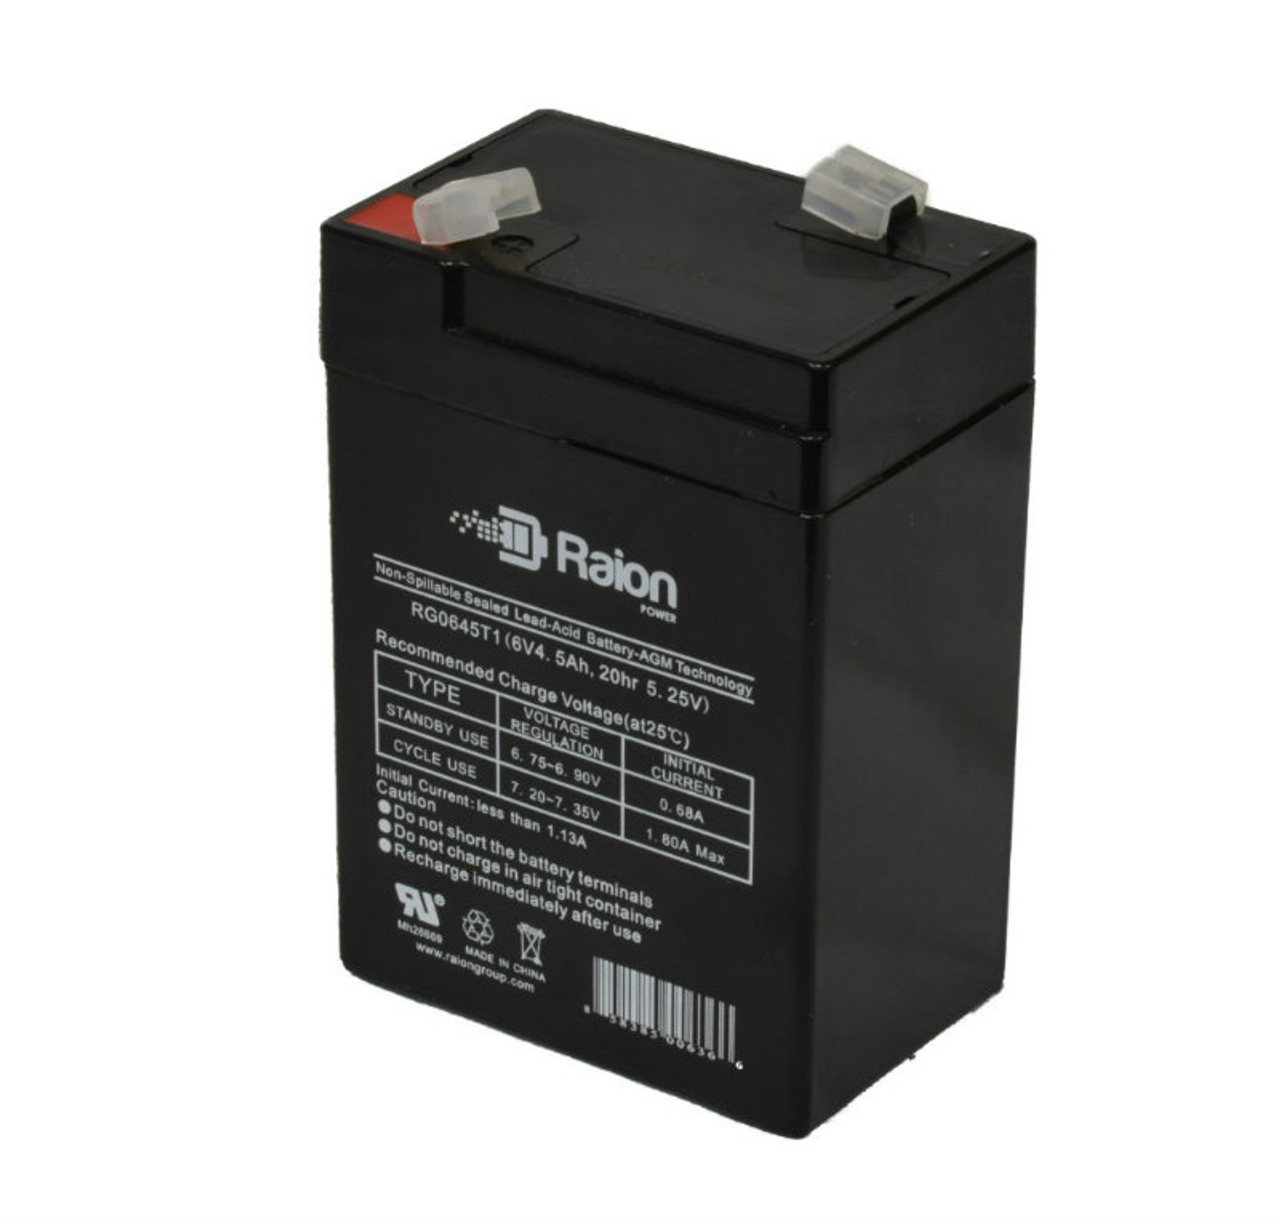 Raion Power RG0645T1 6V 4.5Ah Replacement Battery Cartridge for Technacell EP640 Option - CHK DIM